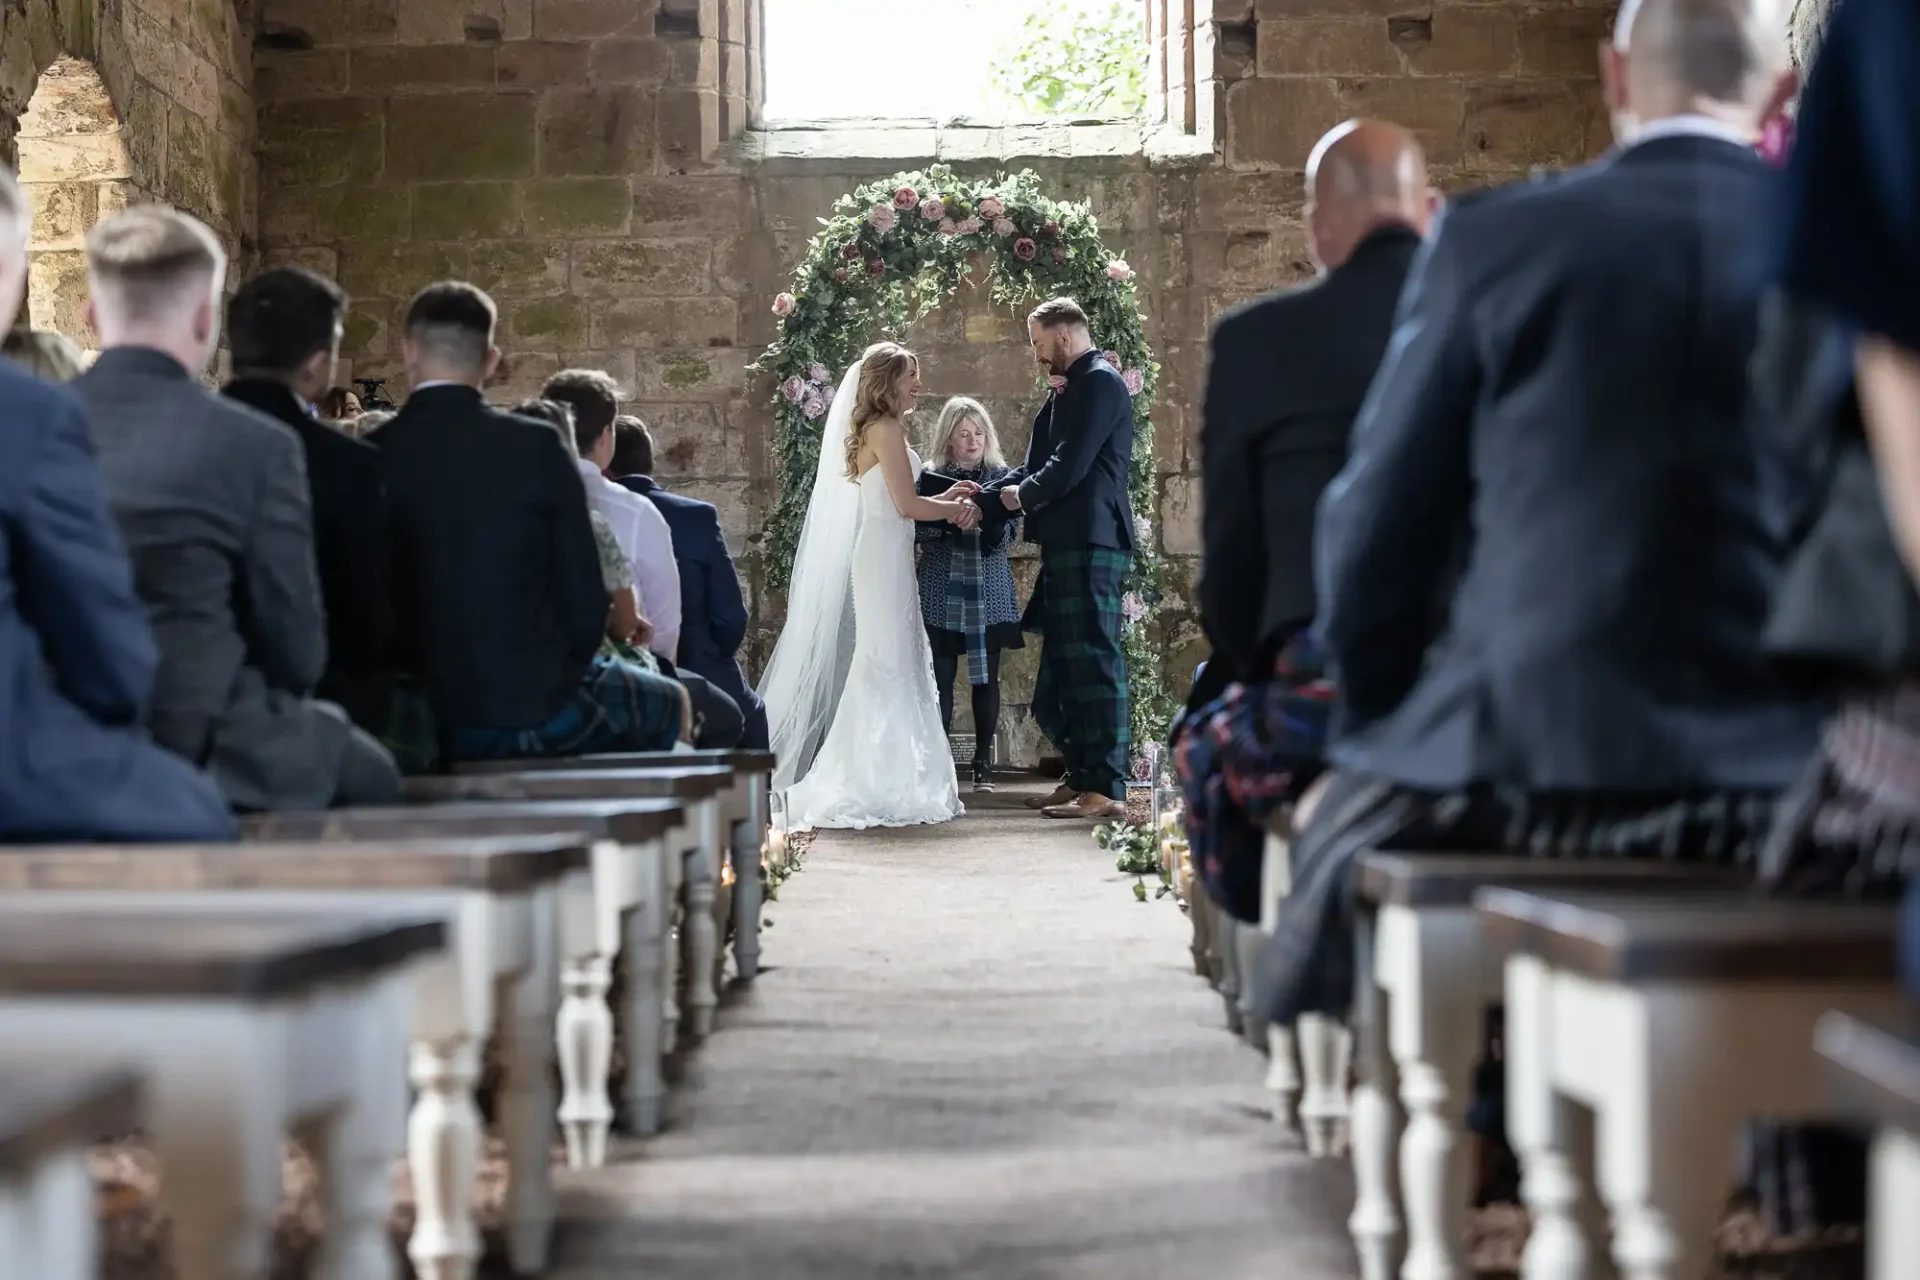 A bride and groom holding hands during their wedding ceremony in a rustic church setting, surrounded by guests.